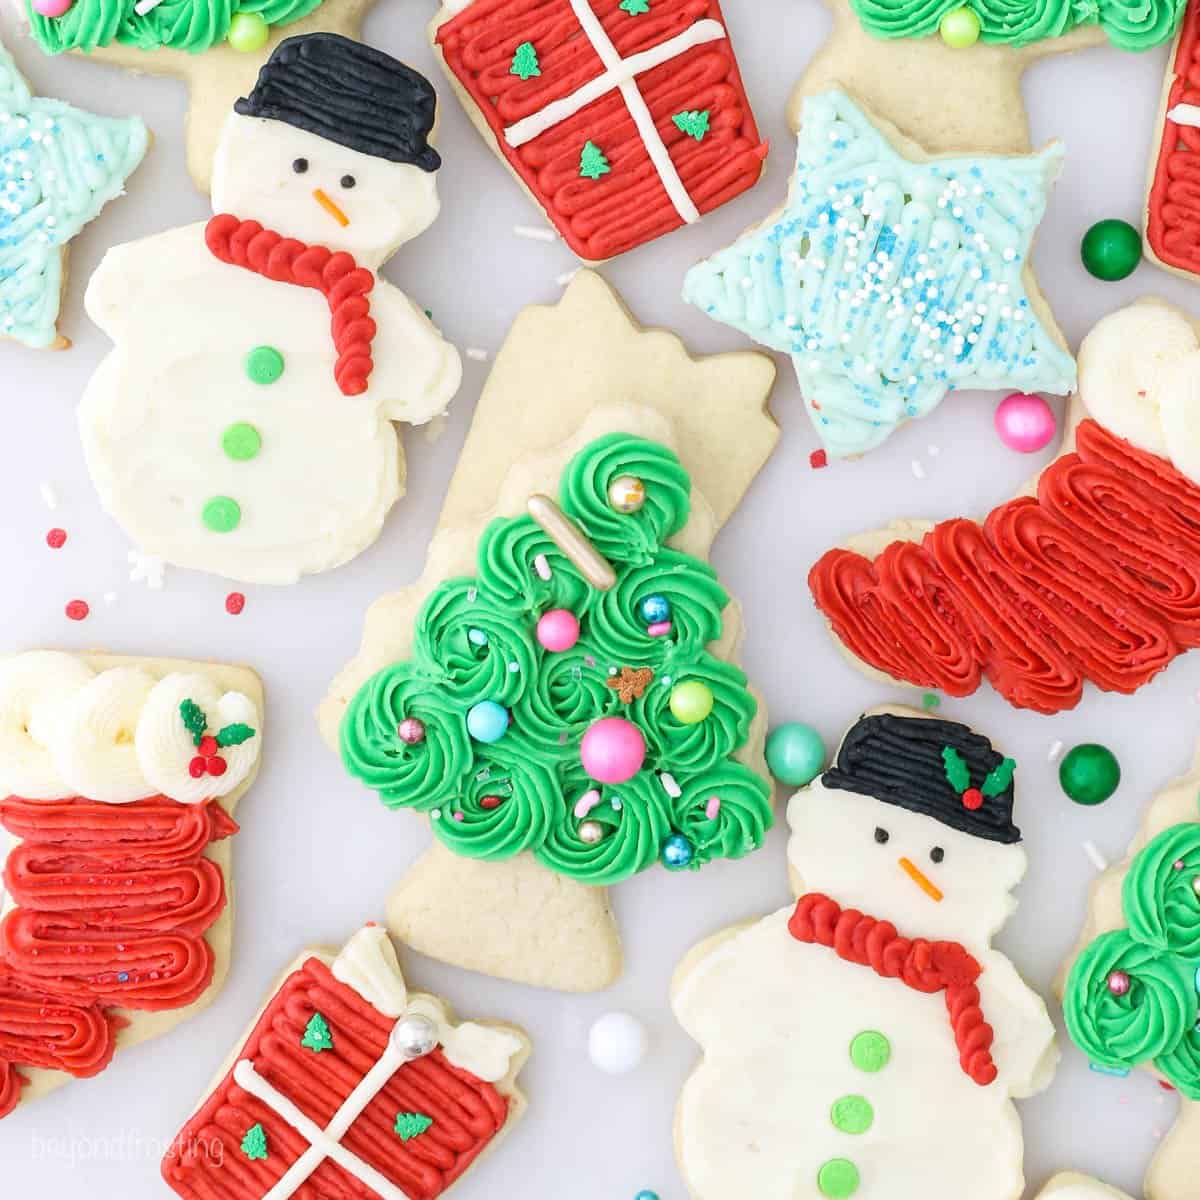 How to Make Decorated Sugar Cookies with Royal Icing